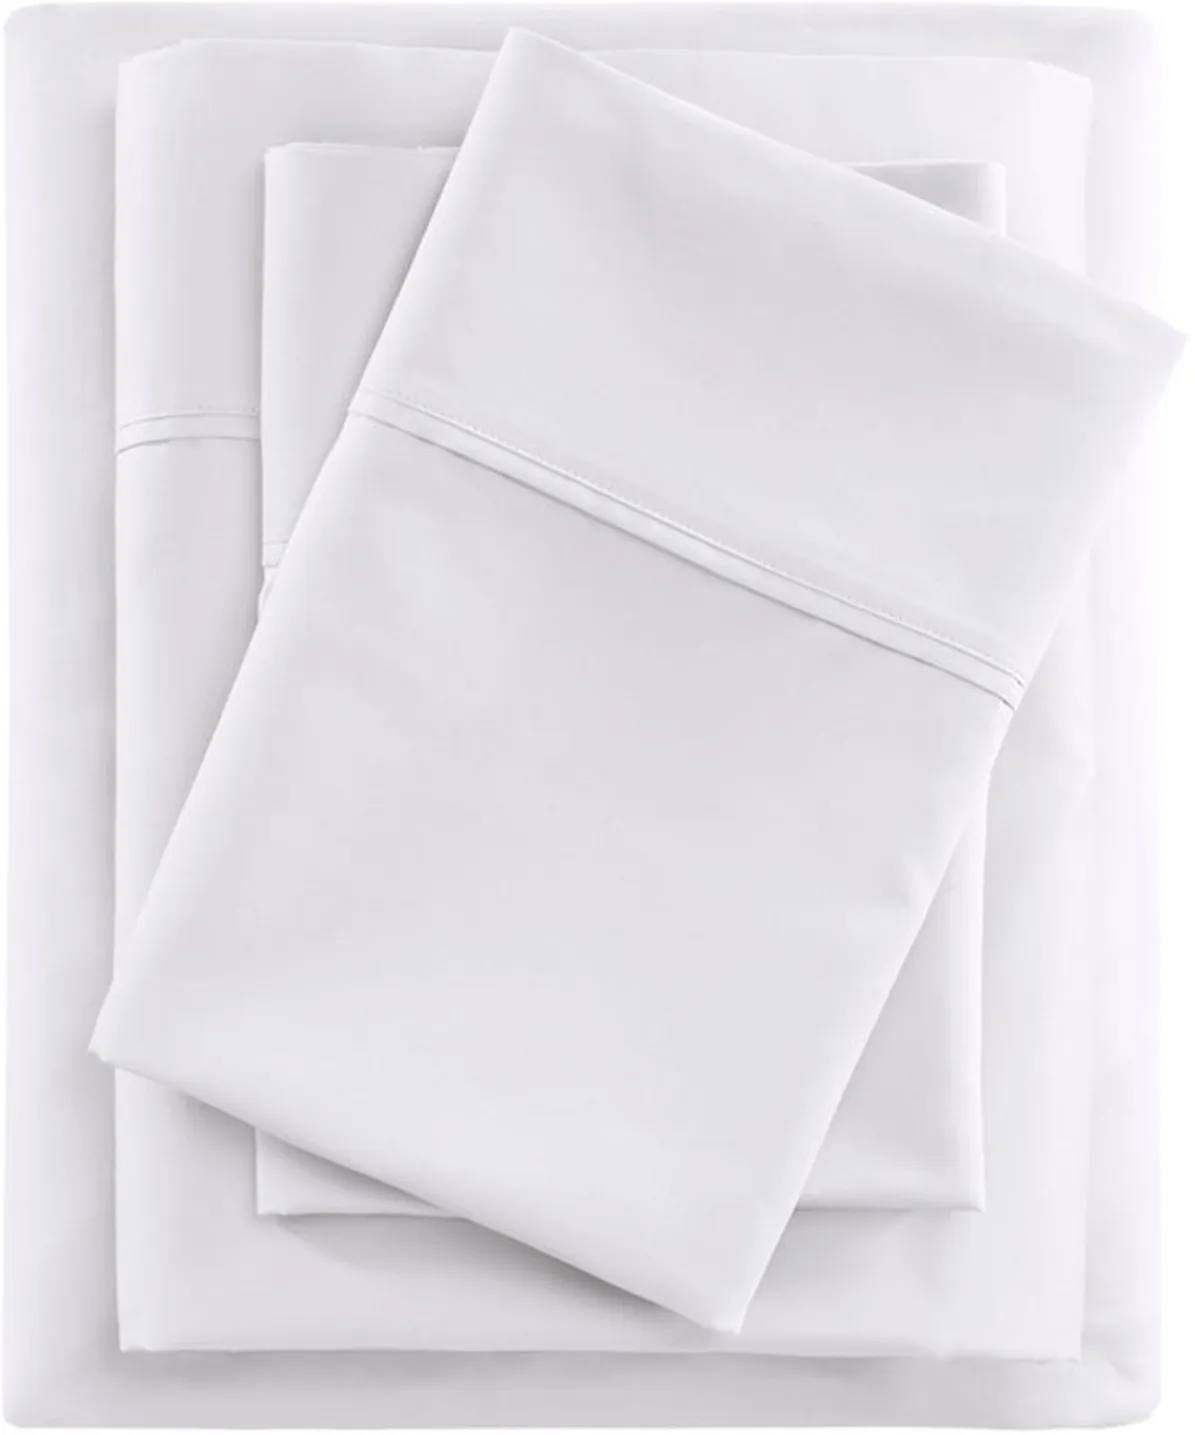 Olliix by Beautyrest White King 600 Thread Count Cooling Cotton Rich Sheet Set